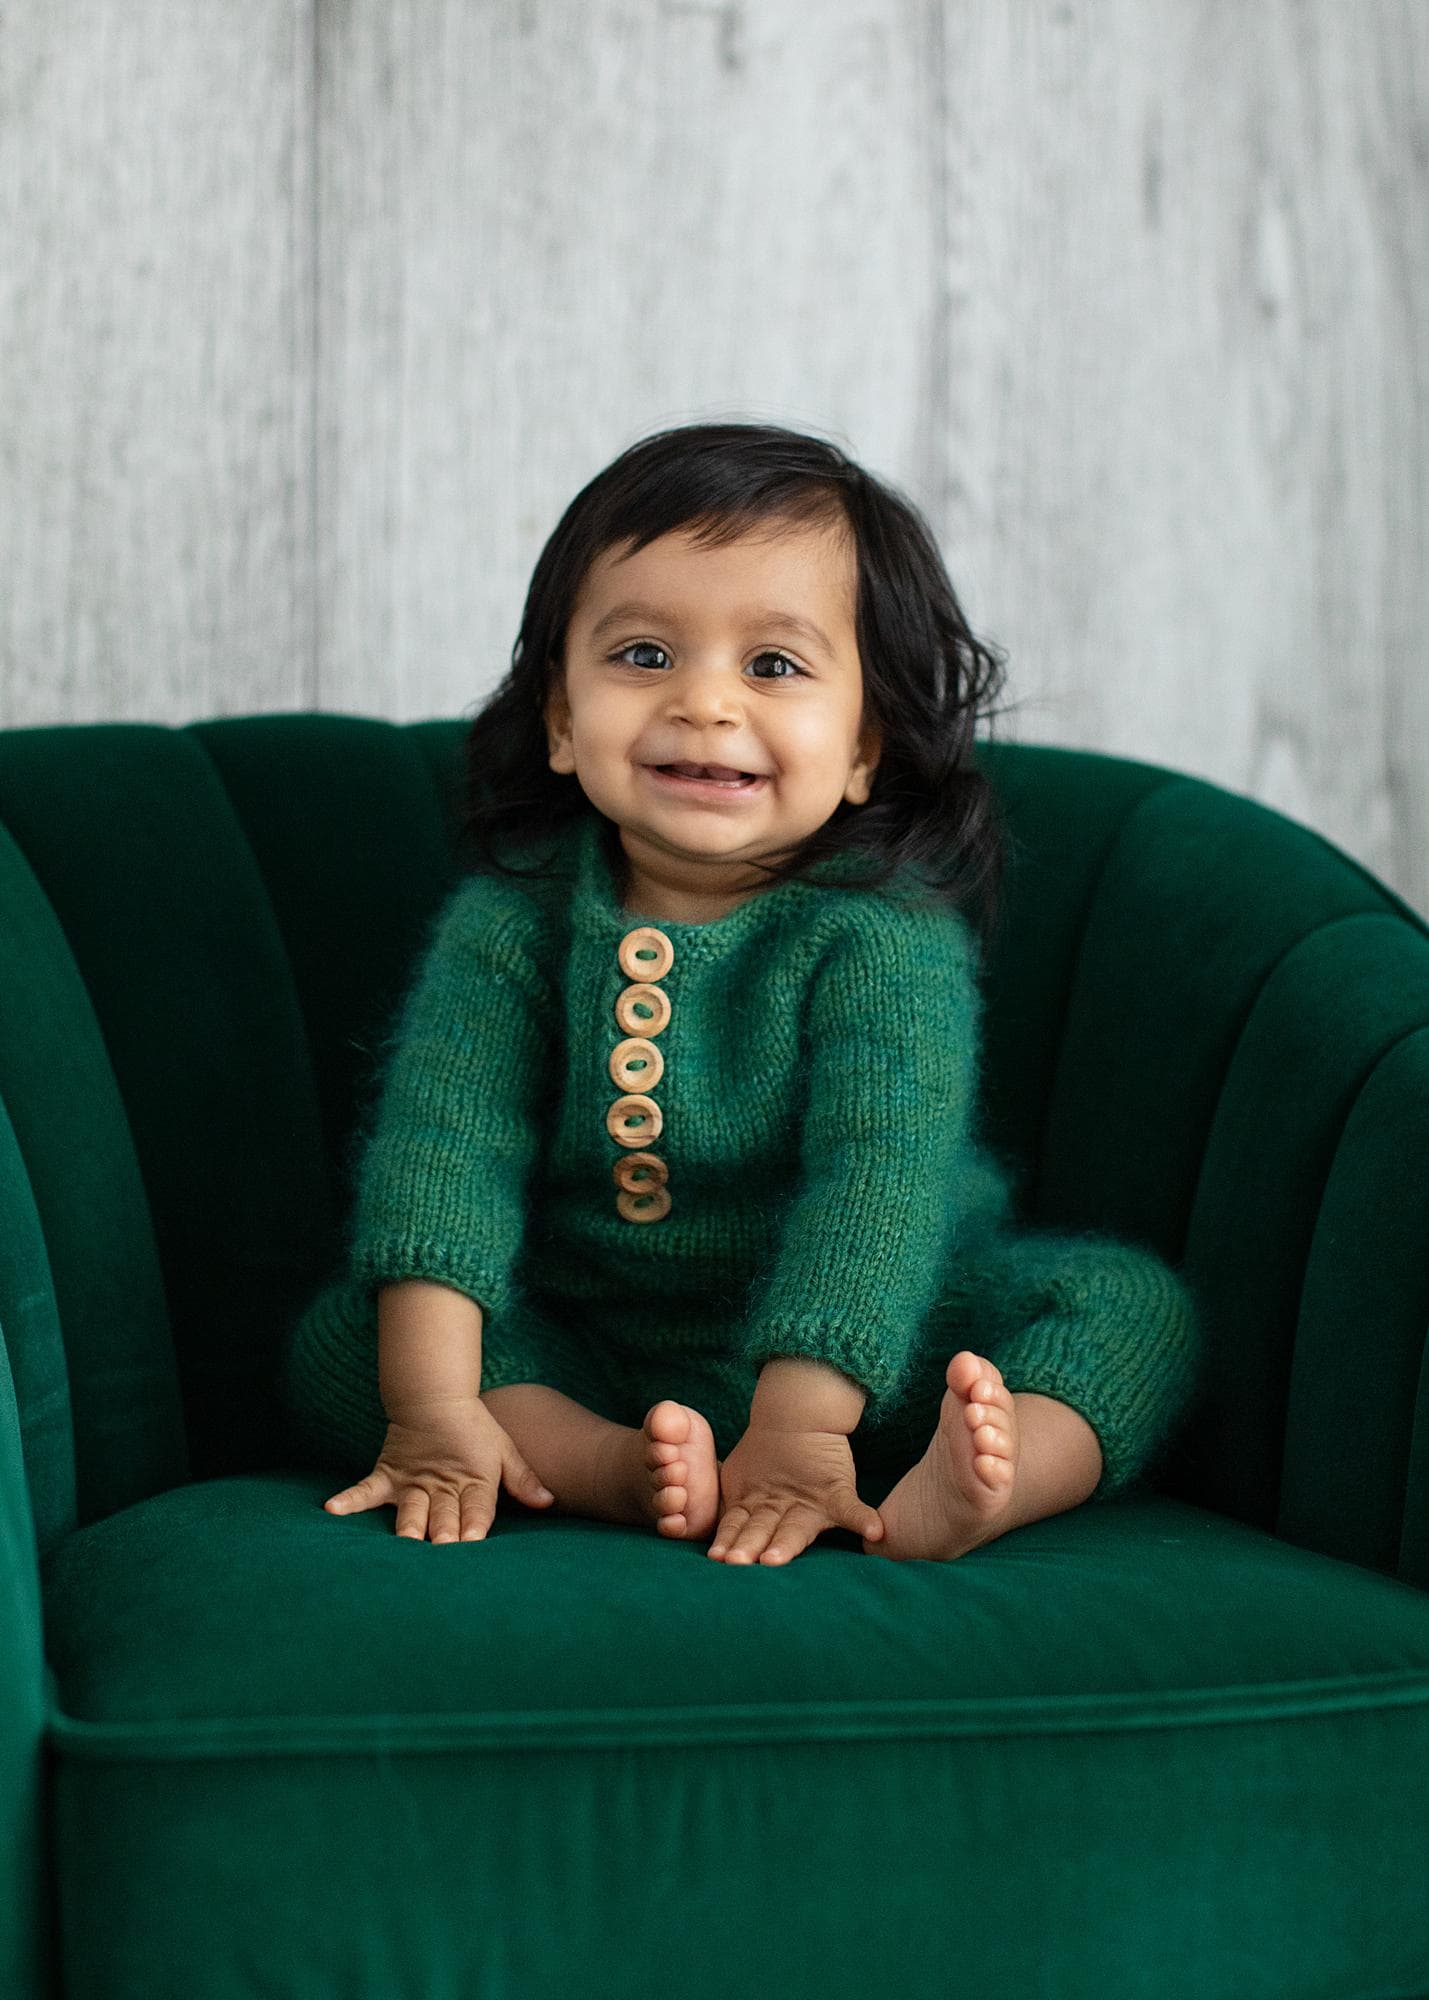 Baby Girl with long black hair sits smiling on a green velvet chair for Baby Photo Shoot